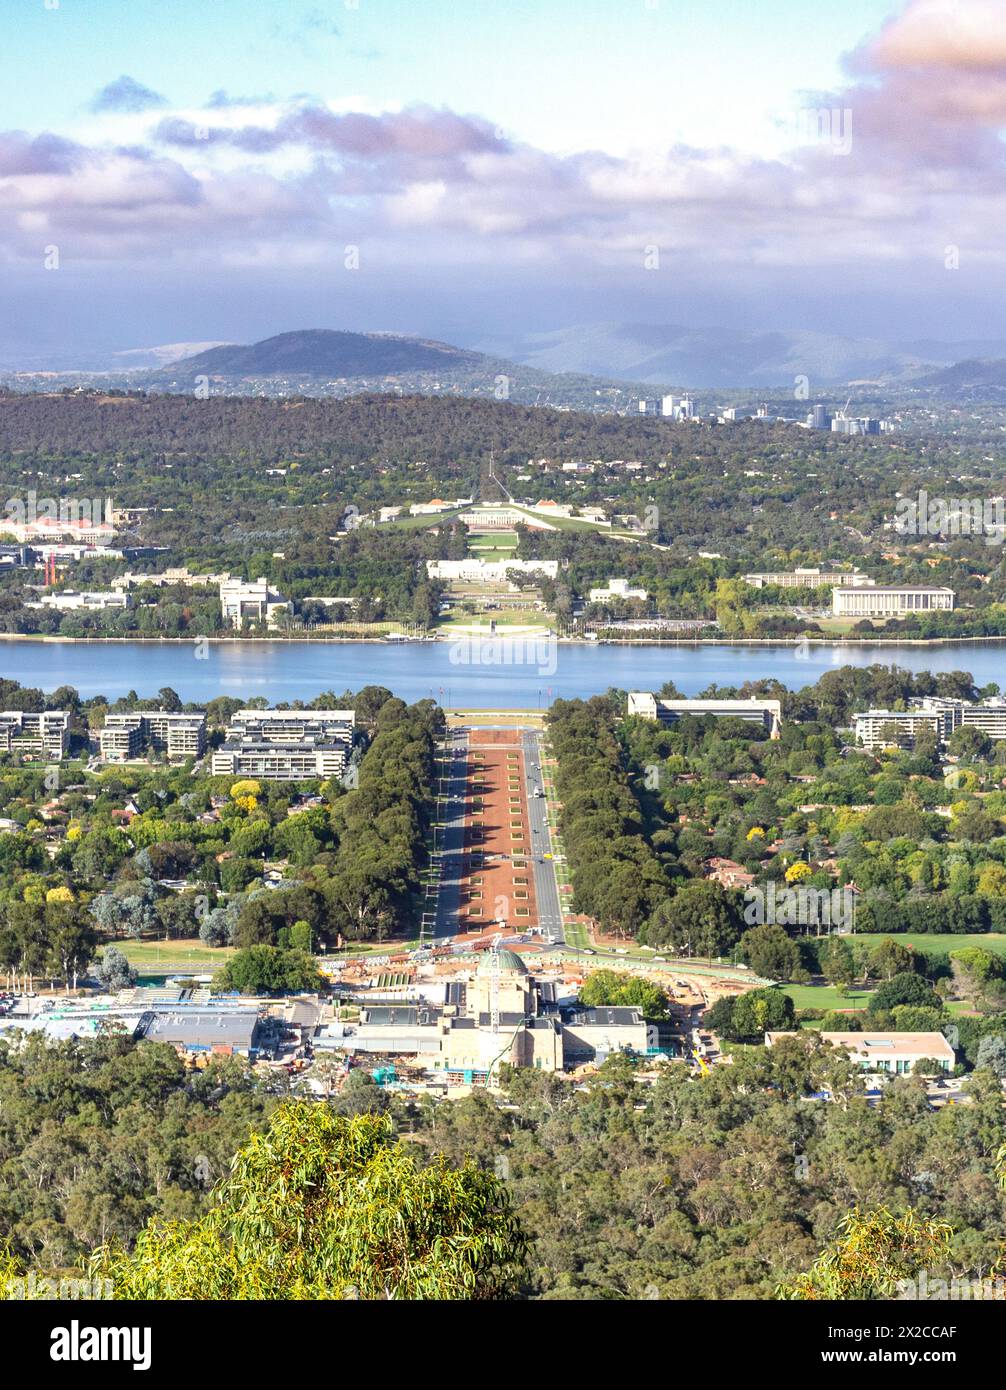 City view from Mount Ainslie Lookout, Mount Ainslie Nature Reserve., Canberra, Australian Capital Territory, Australia Stock Photo